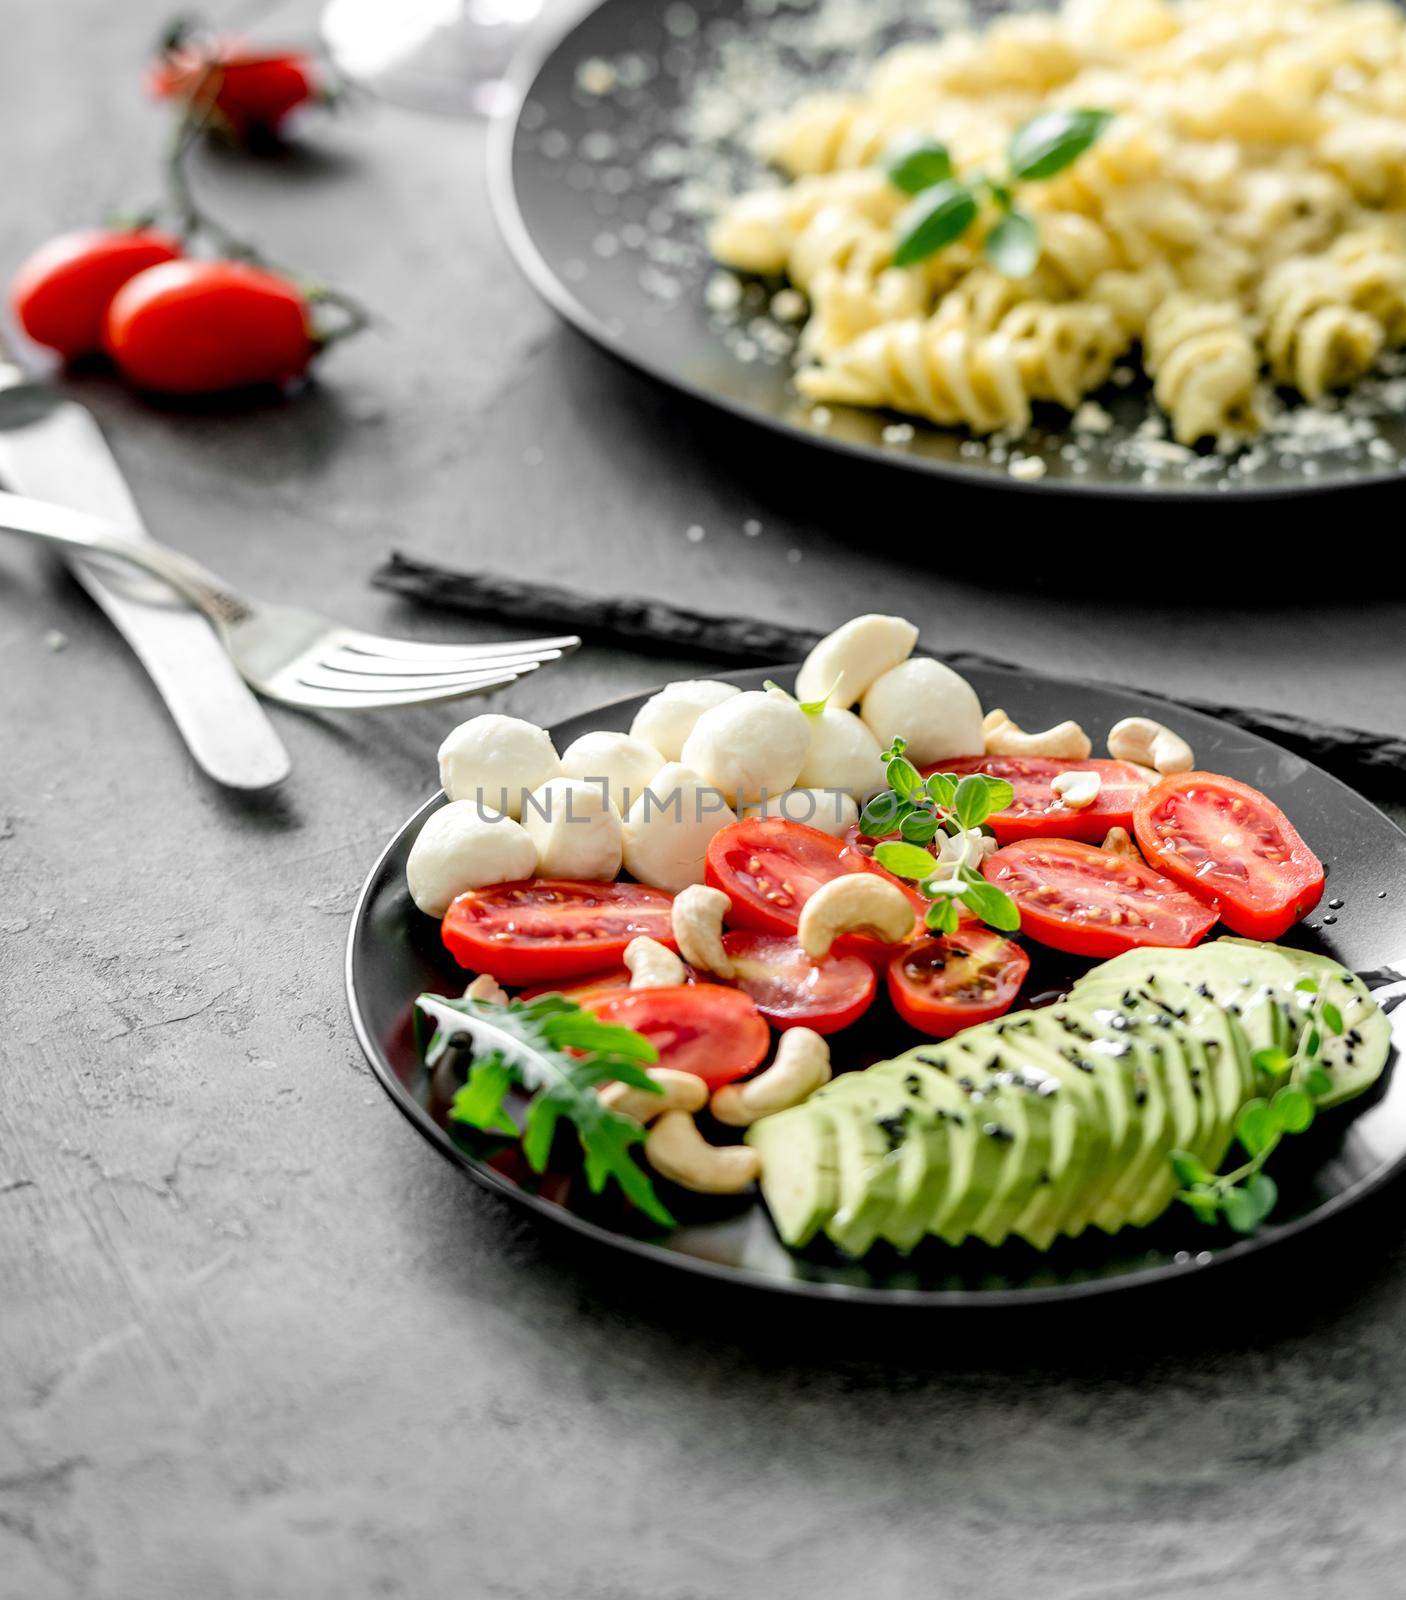 vegetarian dinner: vegetables and pasta with parmesan cheese and herbs by tan4ikk1